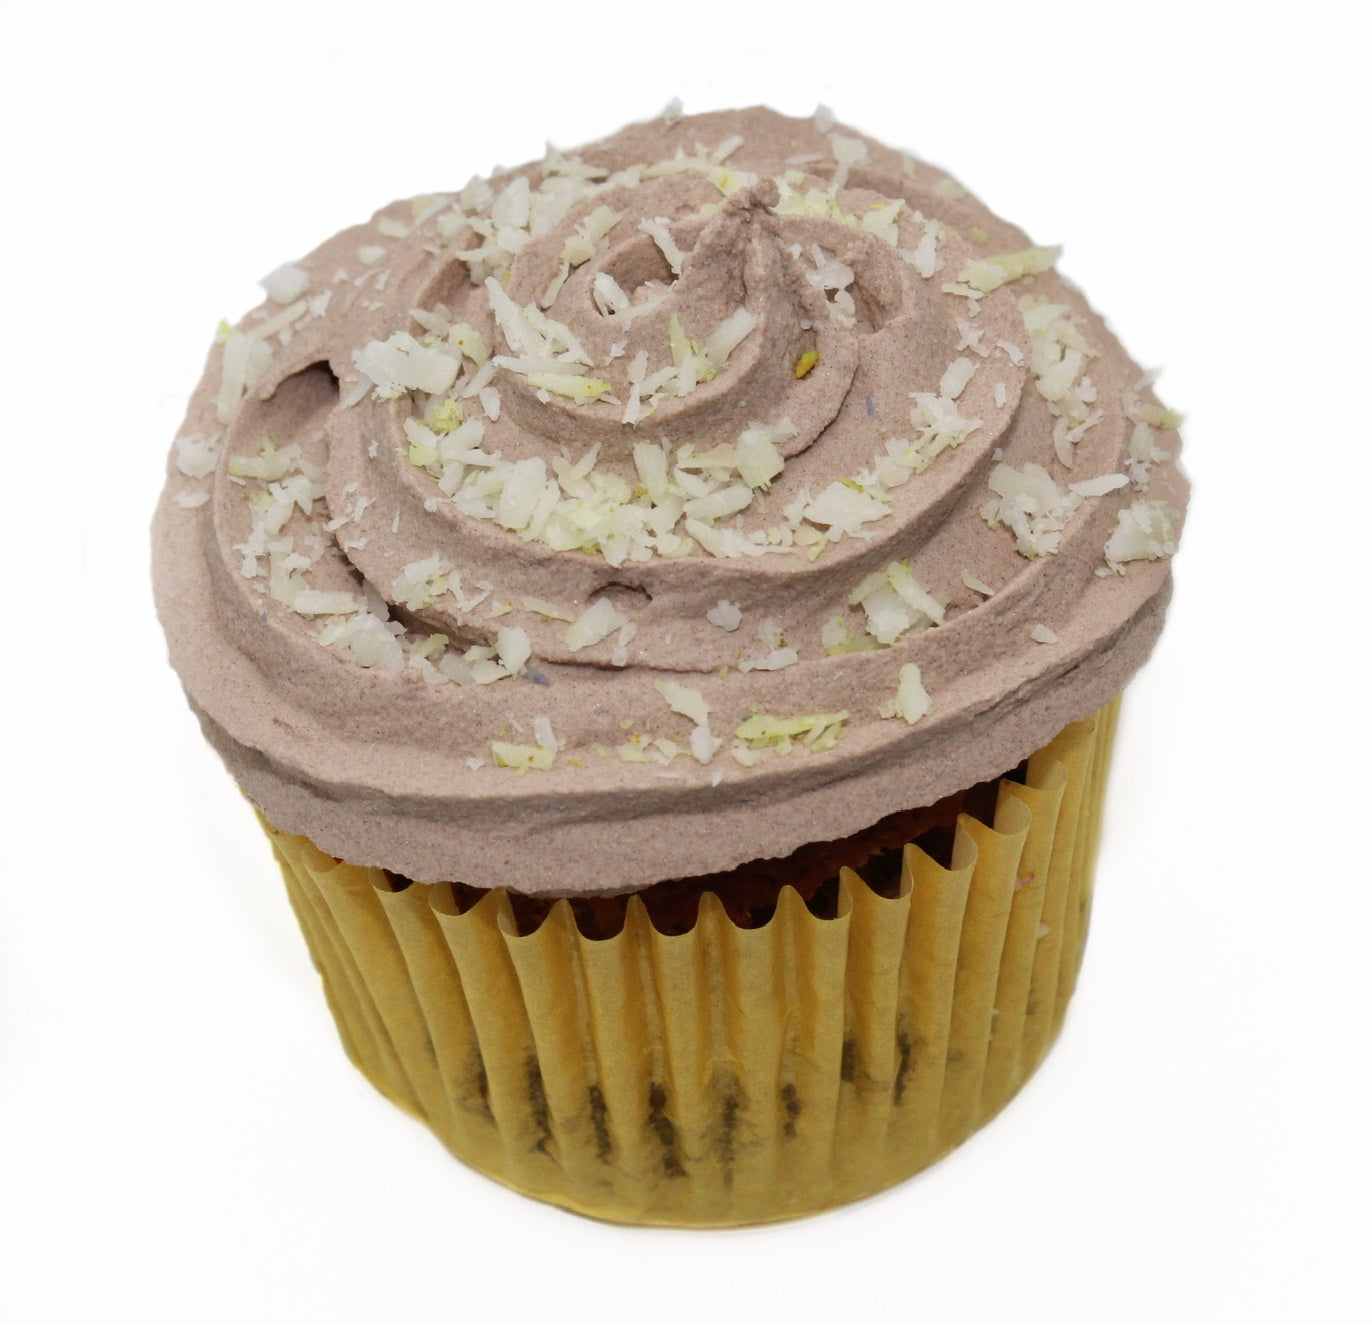 A tasty brown, carob frosted cupcake wrapped in a yellow paper liner with white and yellow coconut flakes sprinkled on top.